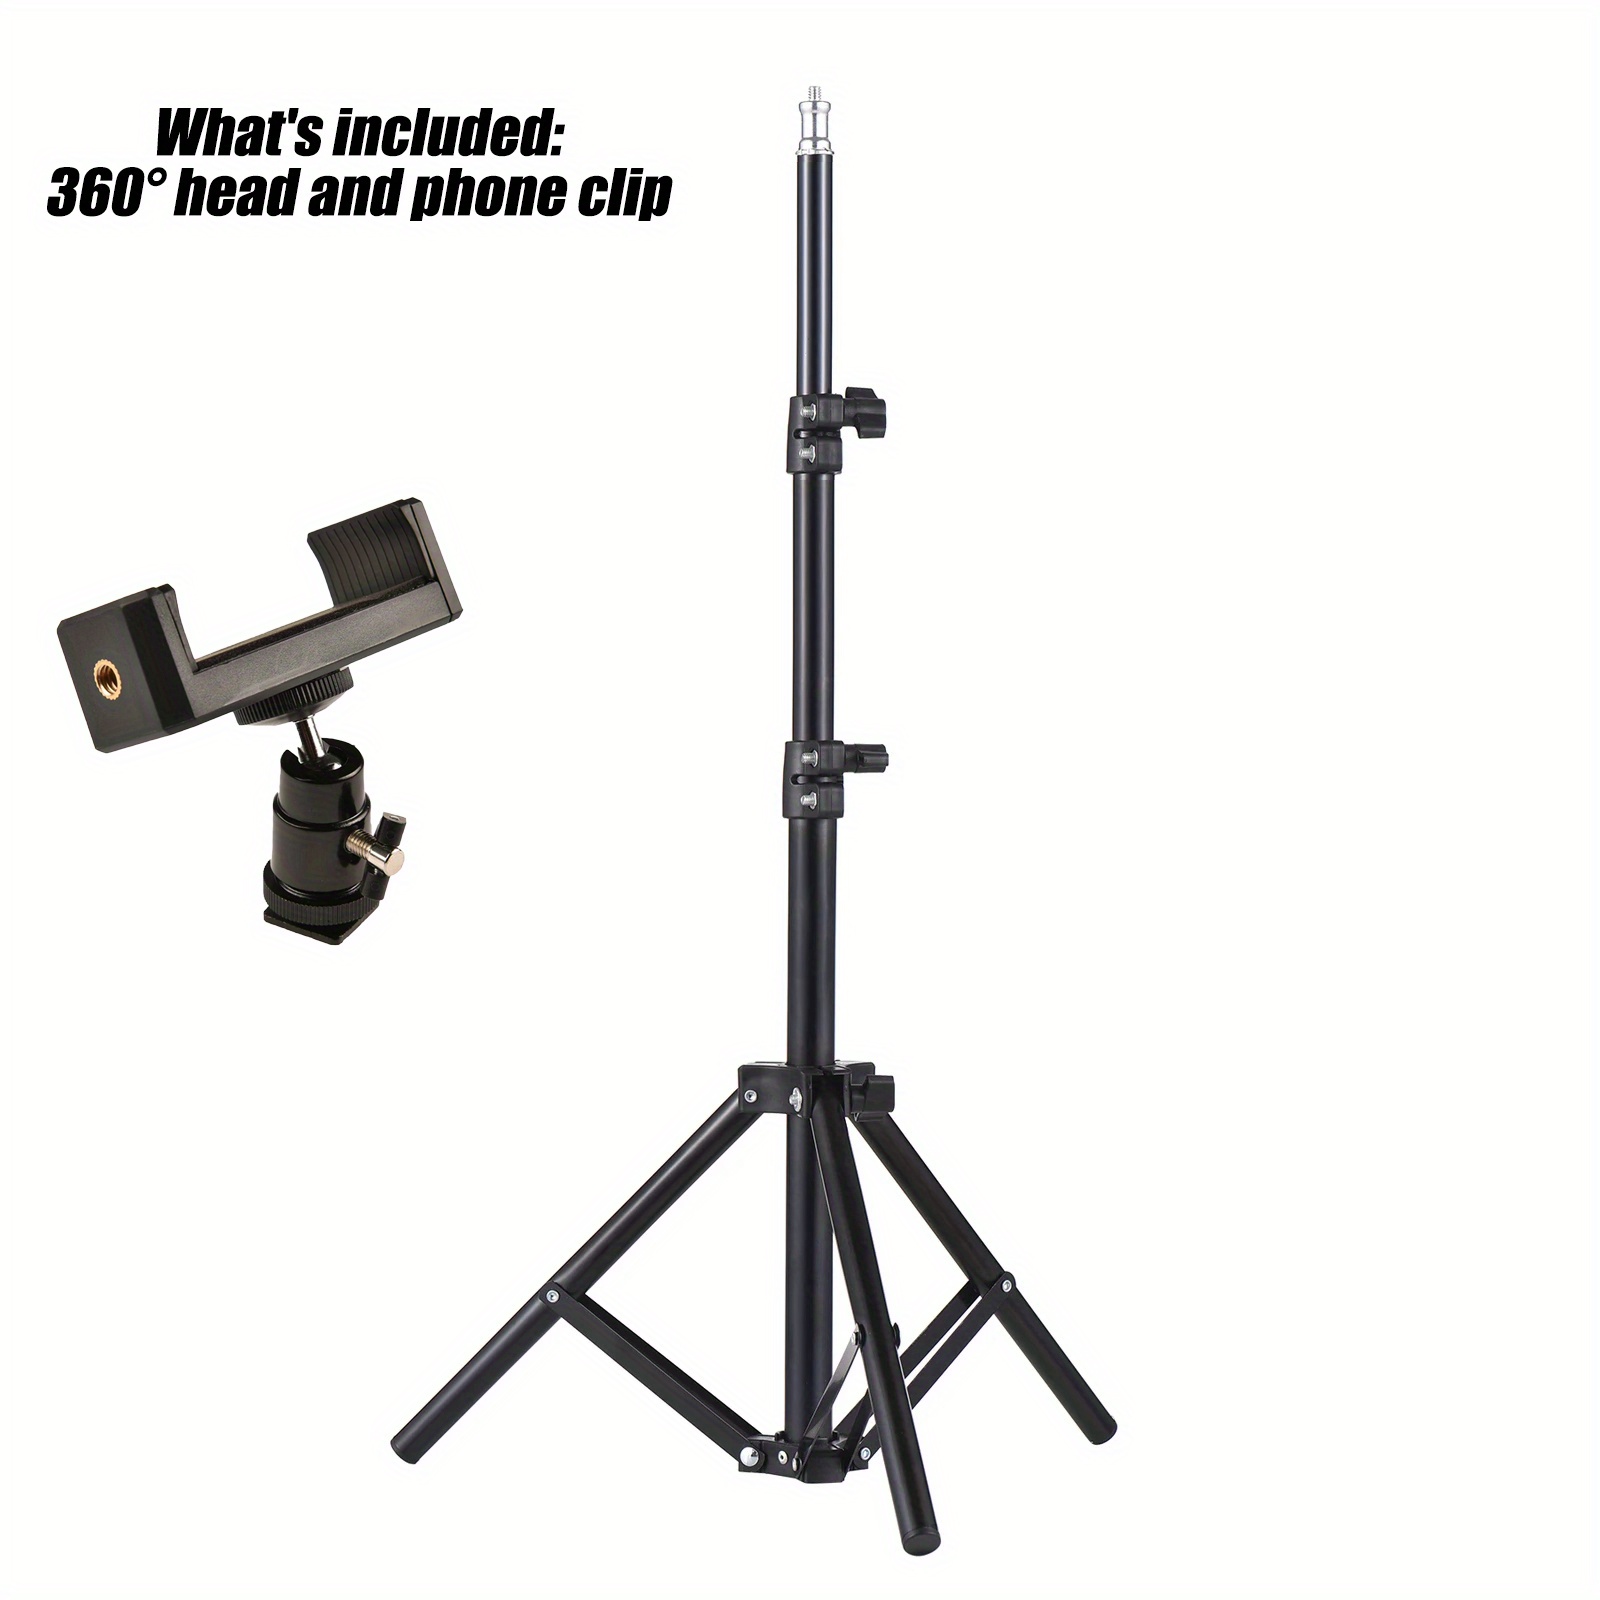 

Adjustable Aluminum Alloy Projector Tripod Stand - Portable, Stretchable Bracket With 1/4" Mount For Lcd Projectors, Indoor & Outdoor Use Portable Projector Projector Accessories